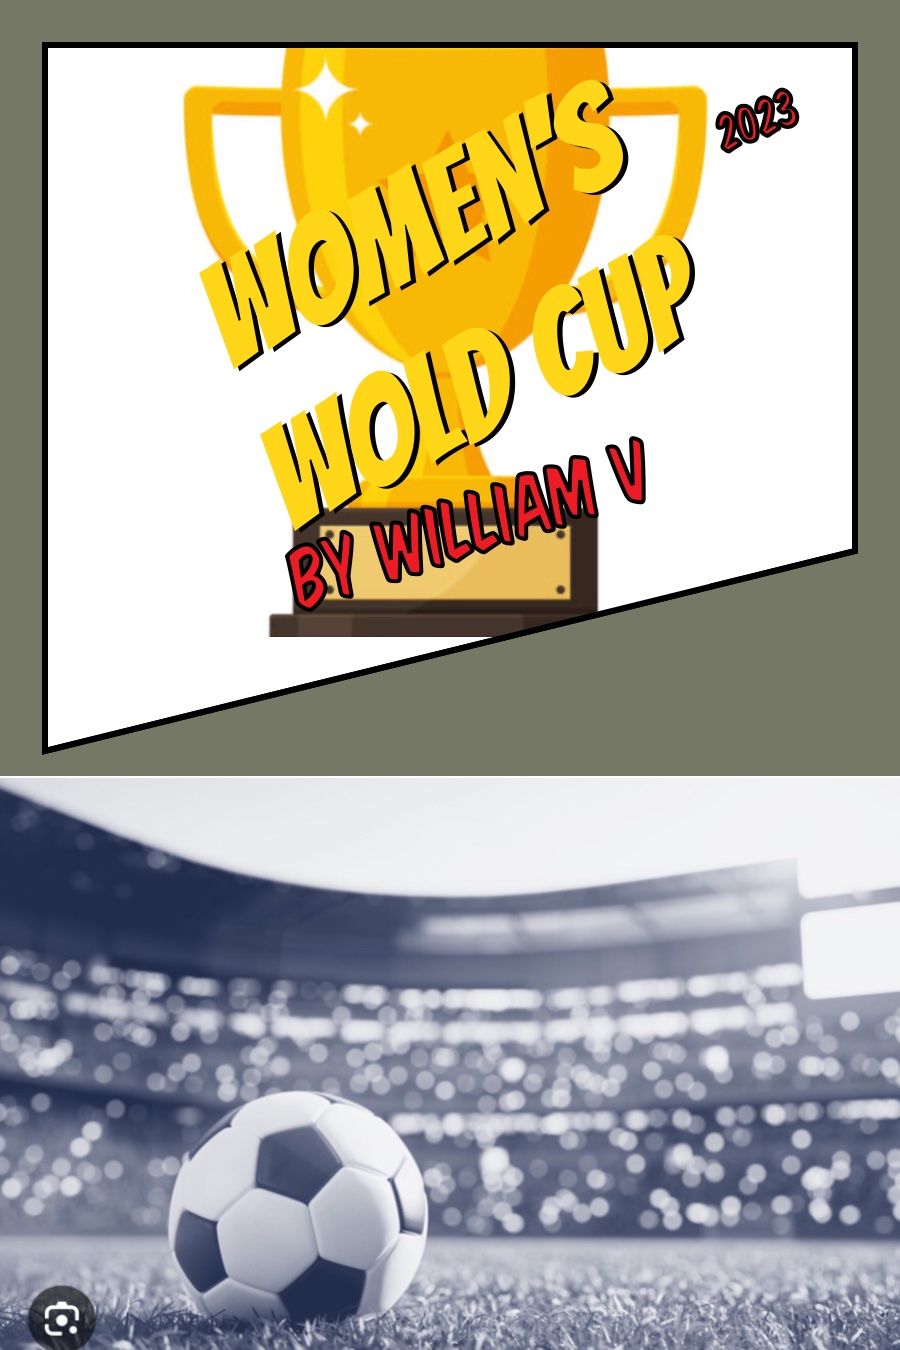 Womens World Cup by William V